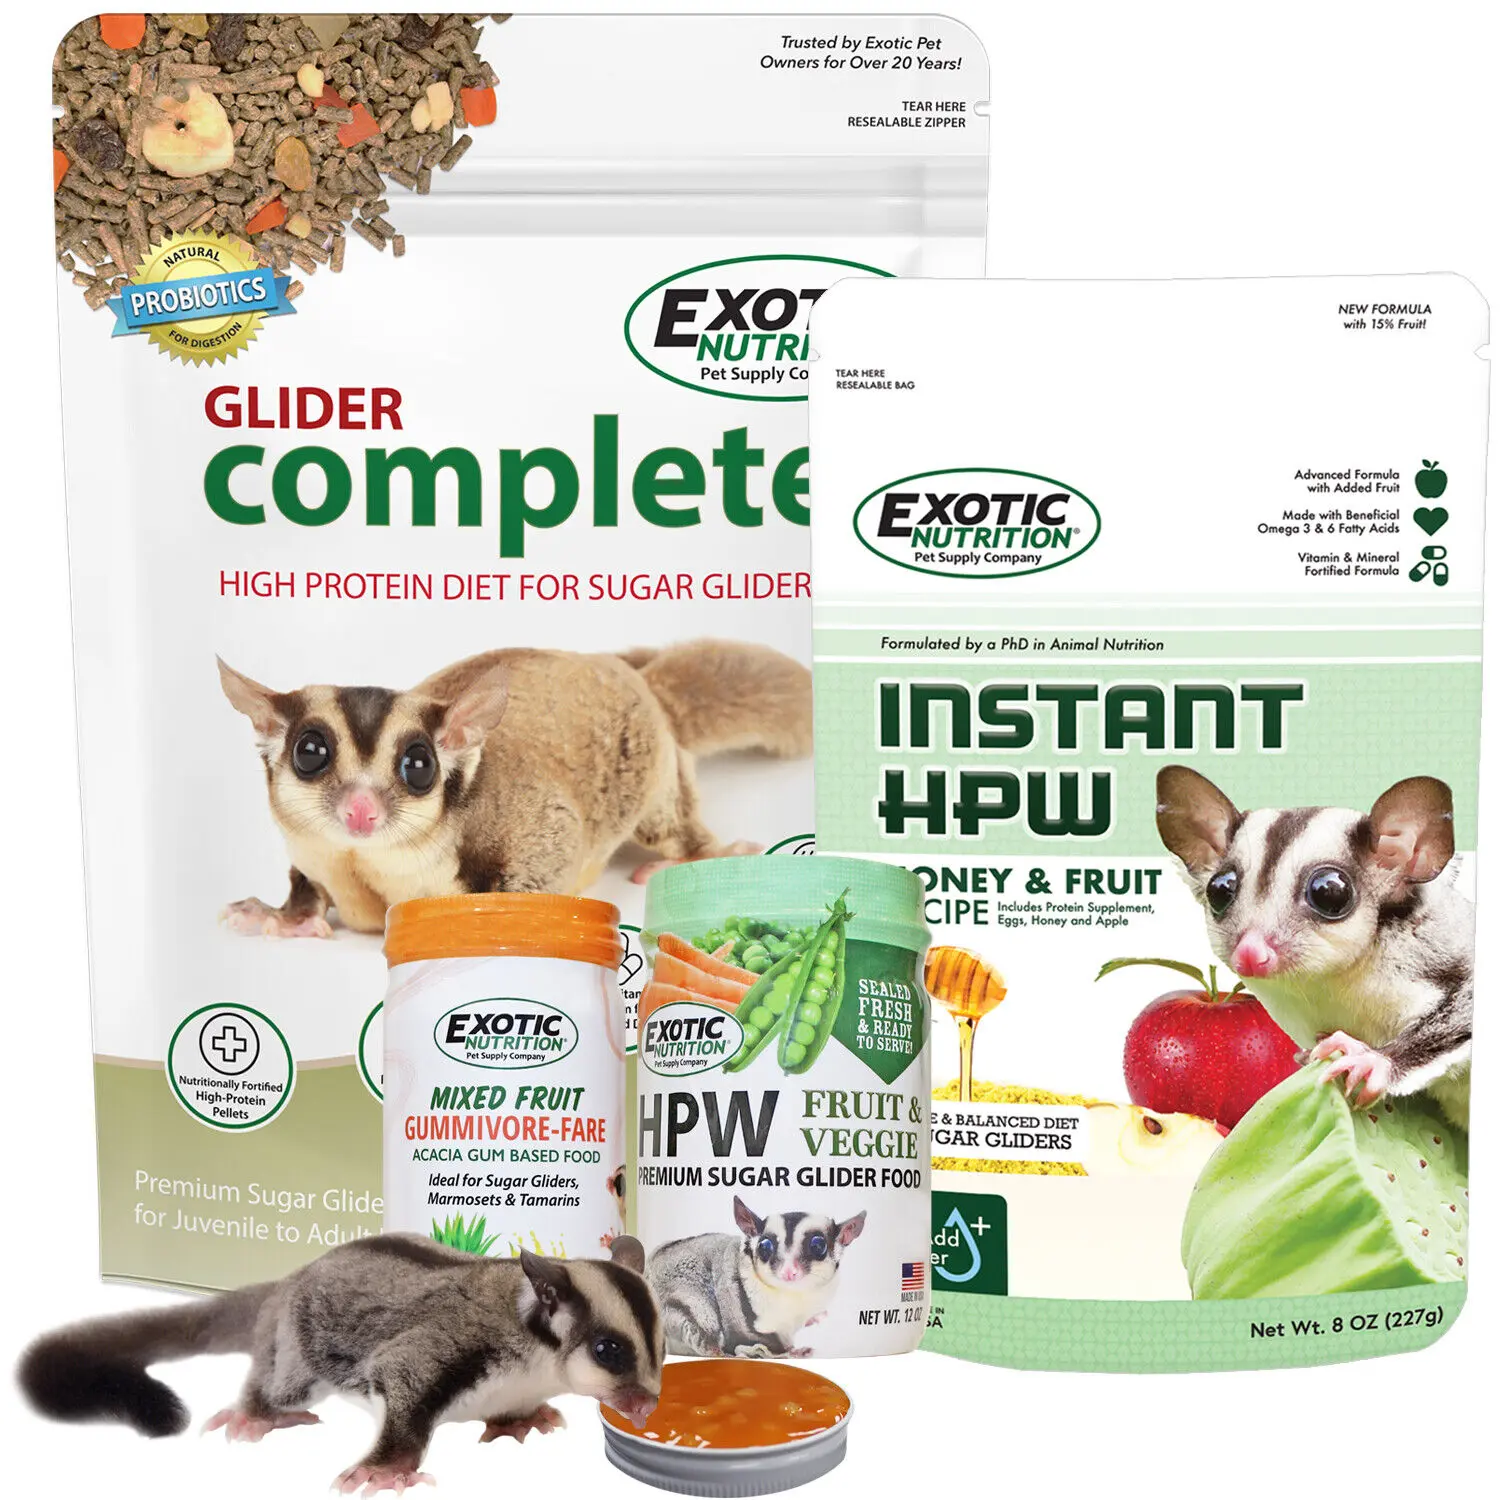 Specially-Formulated Sugar Glider Pellets | What Can My Sugar Glider Eat?